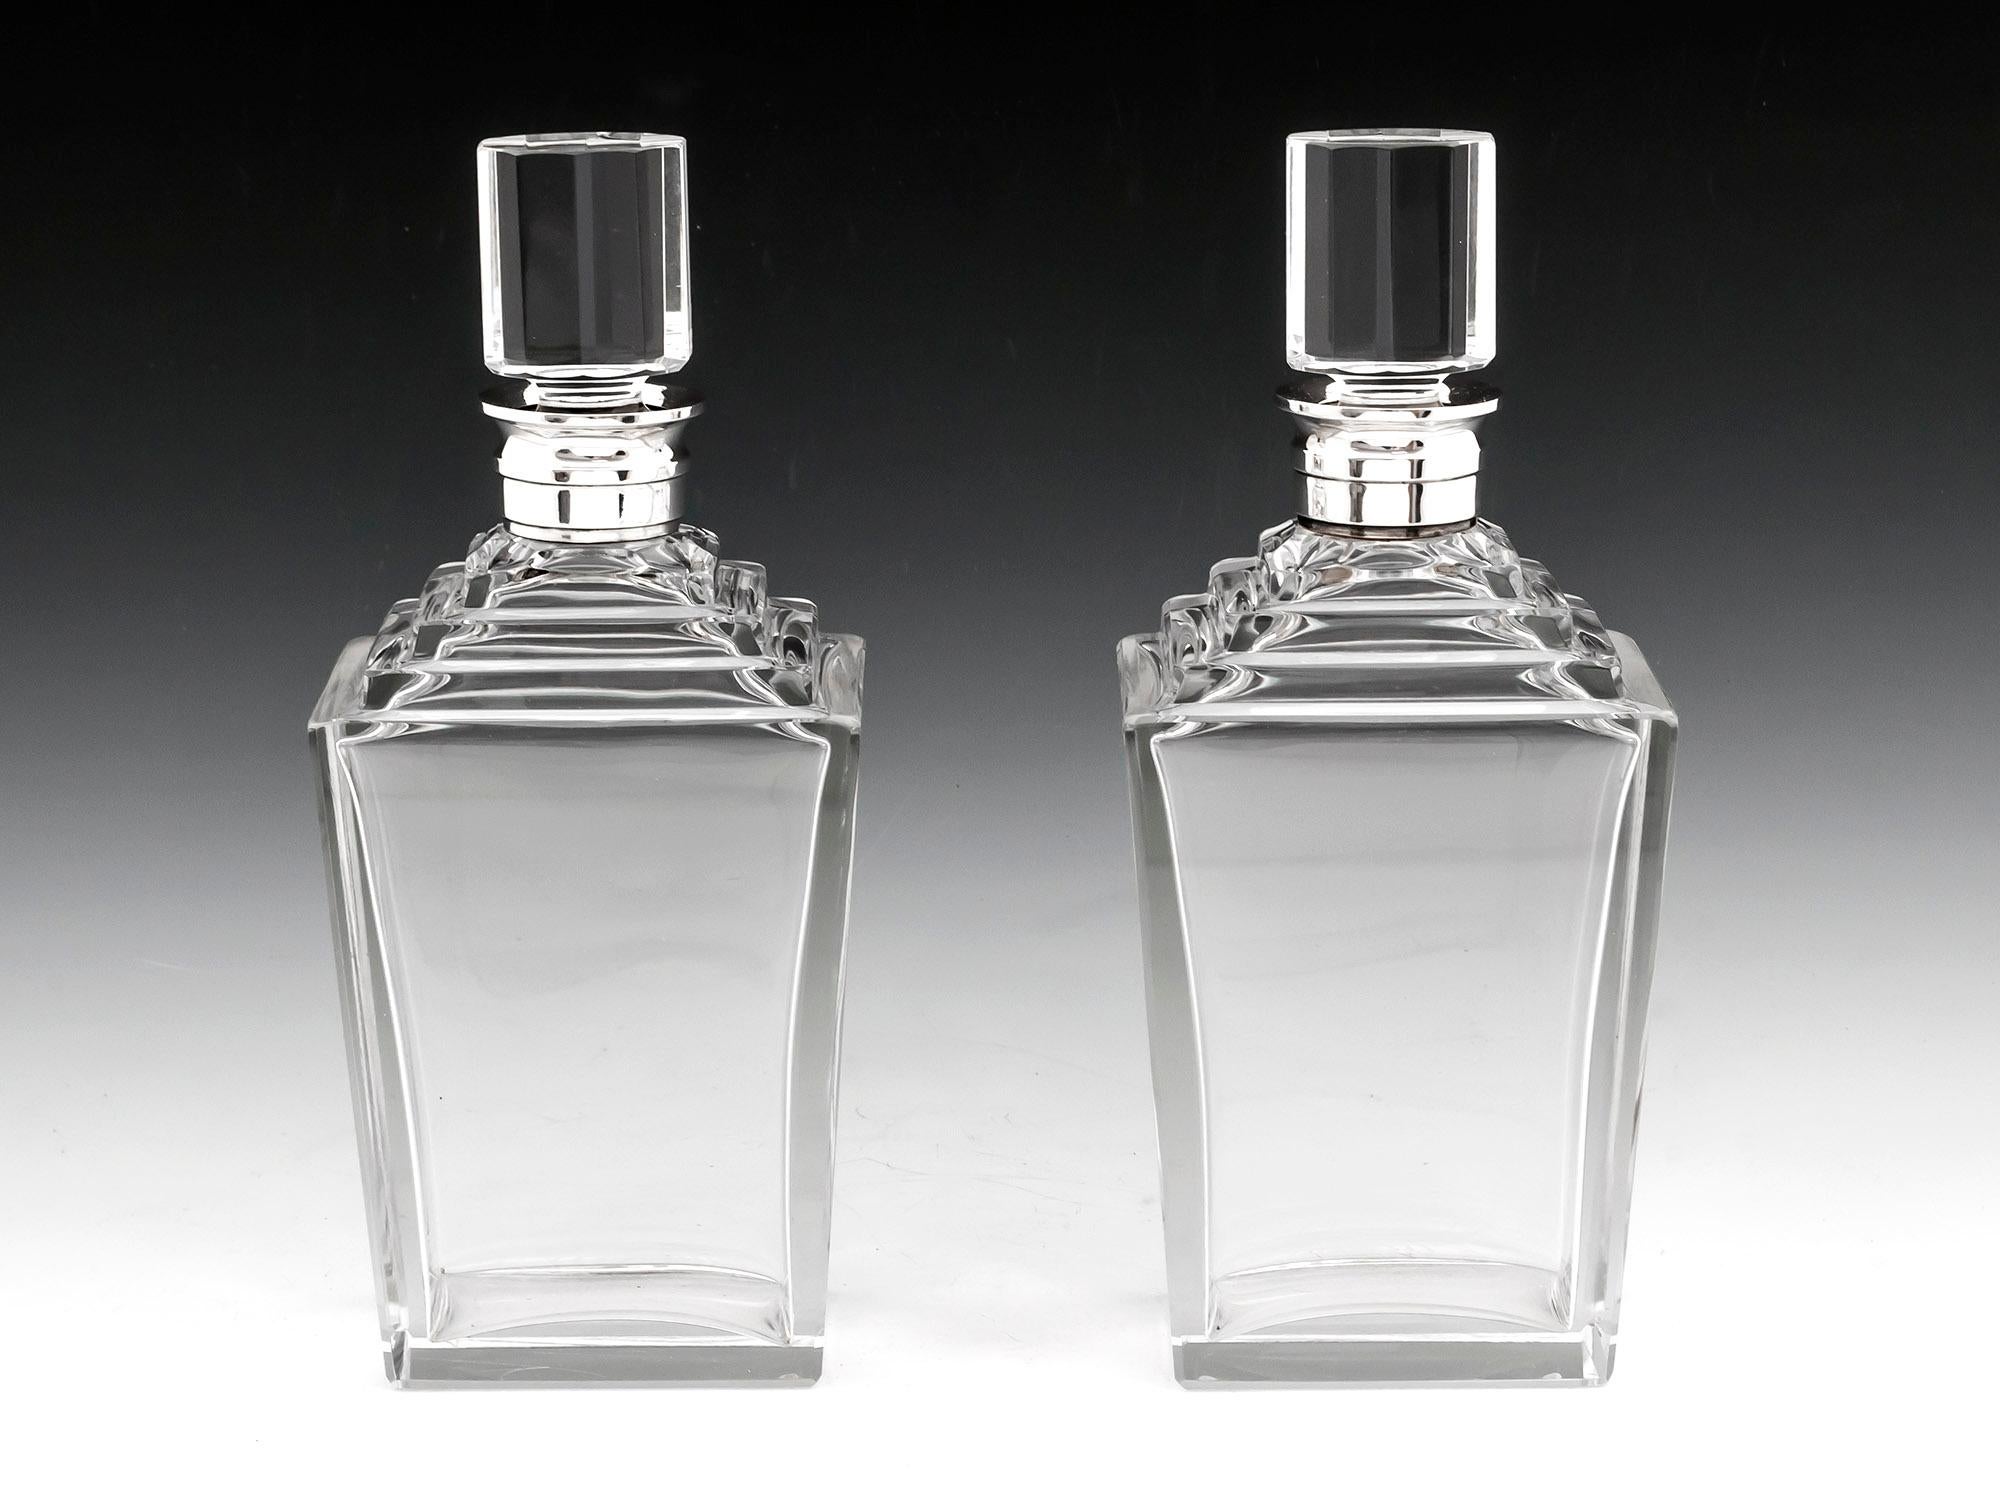 Pair of exquisite Art Deco Decanters with tapered sides, stepped shoulders and with sterling silver collars by Birmingham Silversmiths “Adie Brothers Ltd”. Dated 1938. 

These fabulous decanters are typical of the luxurious decadent Art Deco